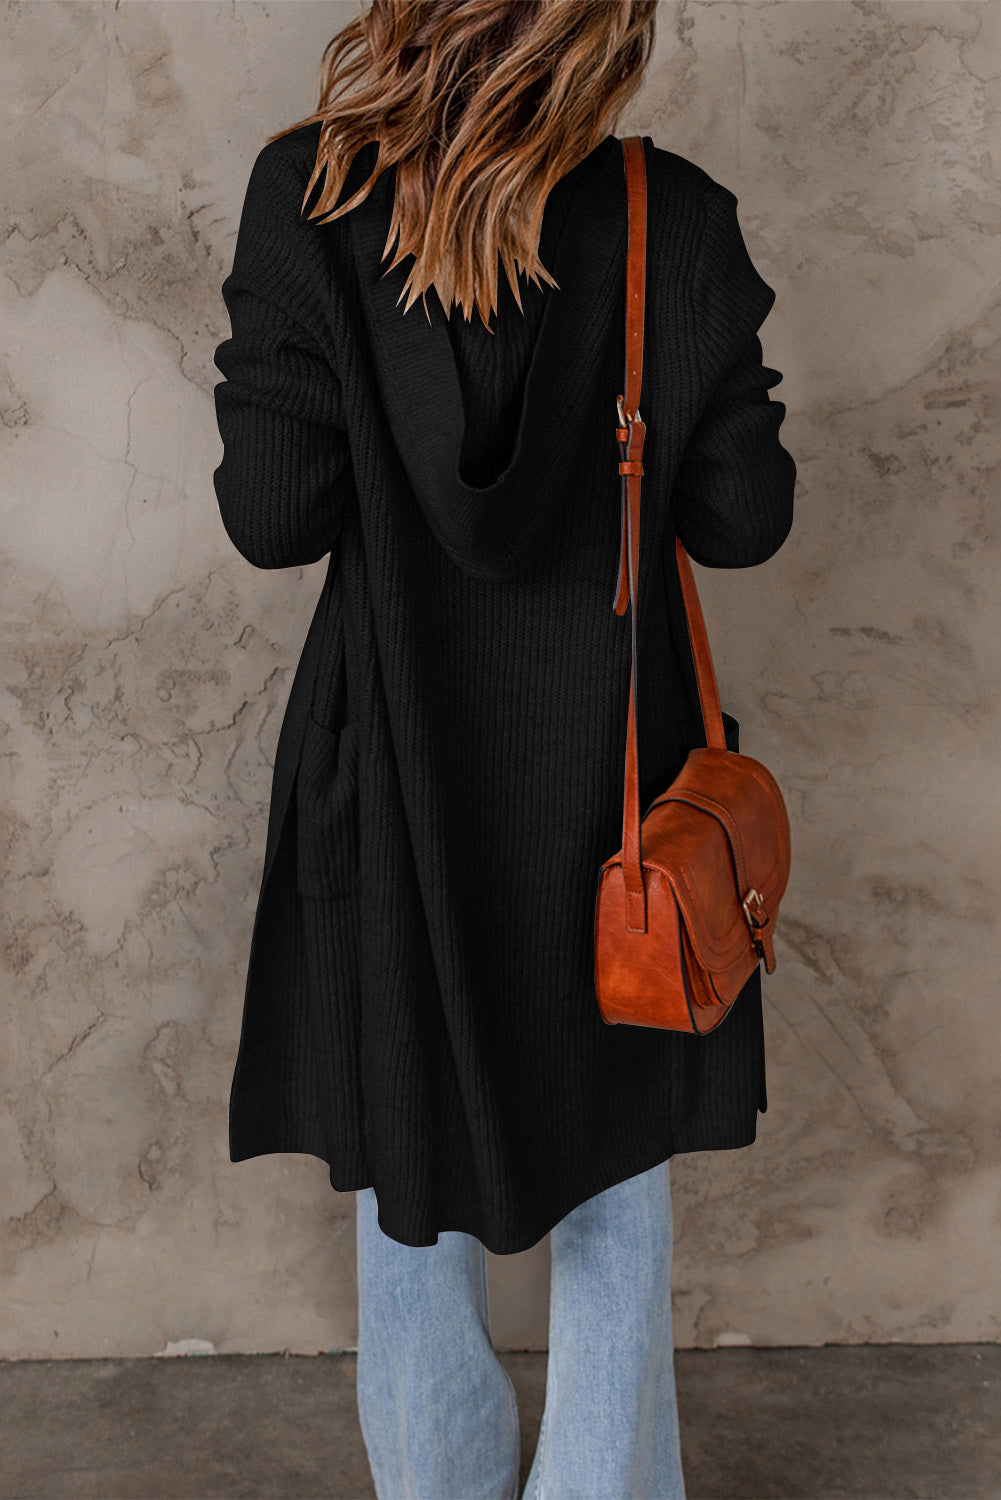 Brief Black Hooded Pockets Open Front Knitted Long Cardigan